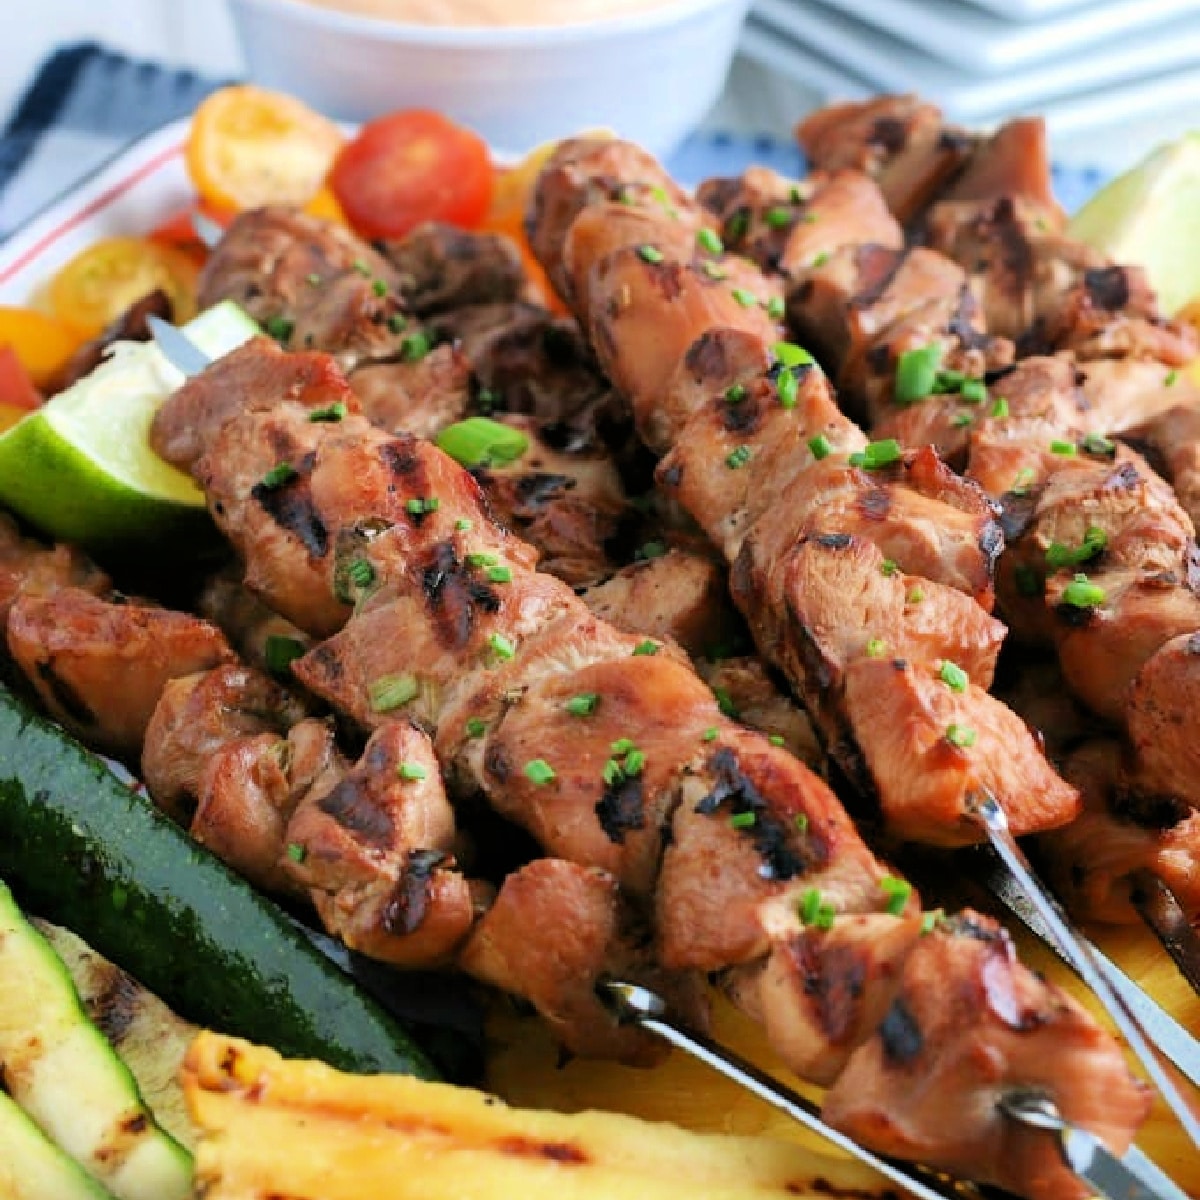 Close up of Platter of Grilled Chicken on skewers.